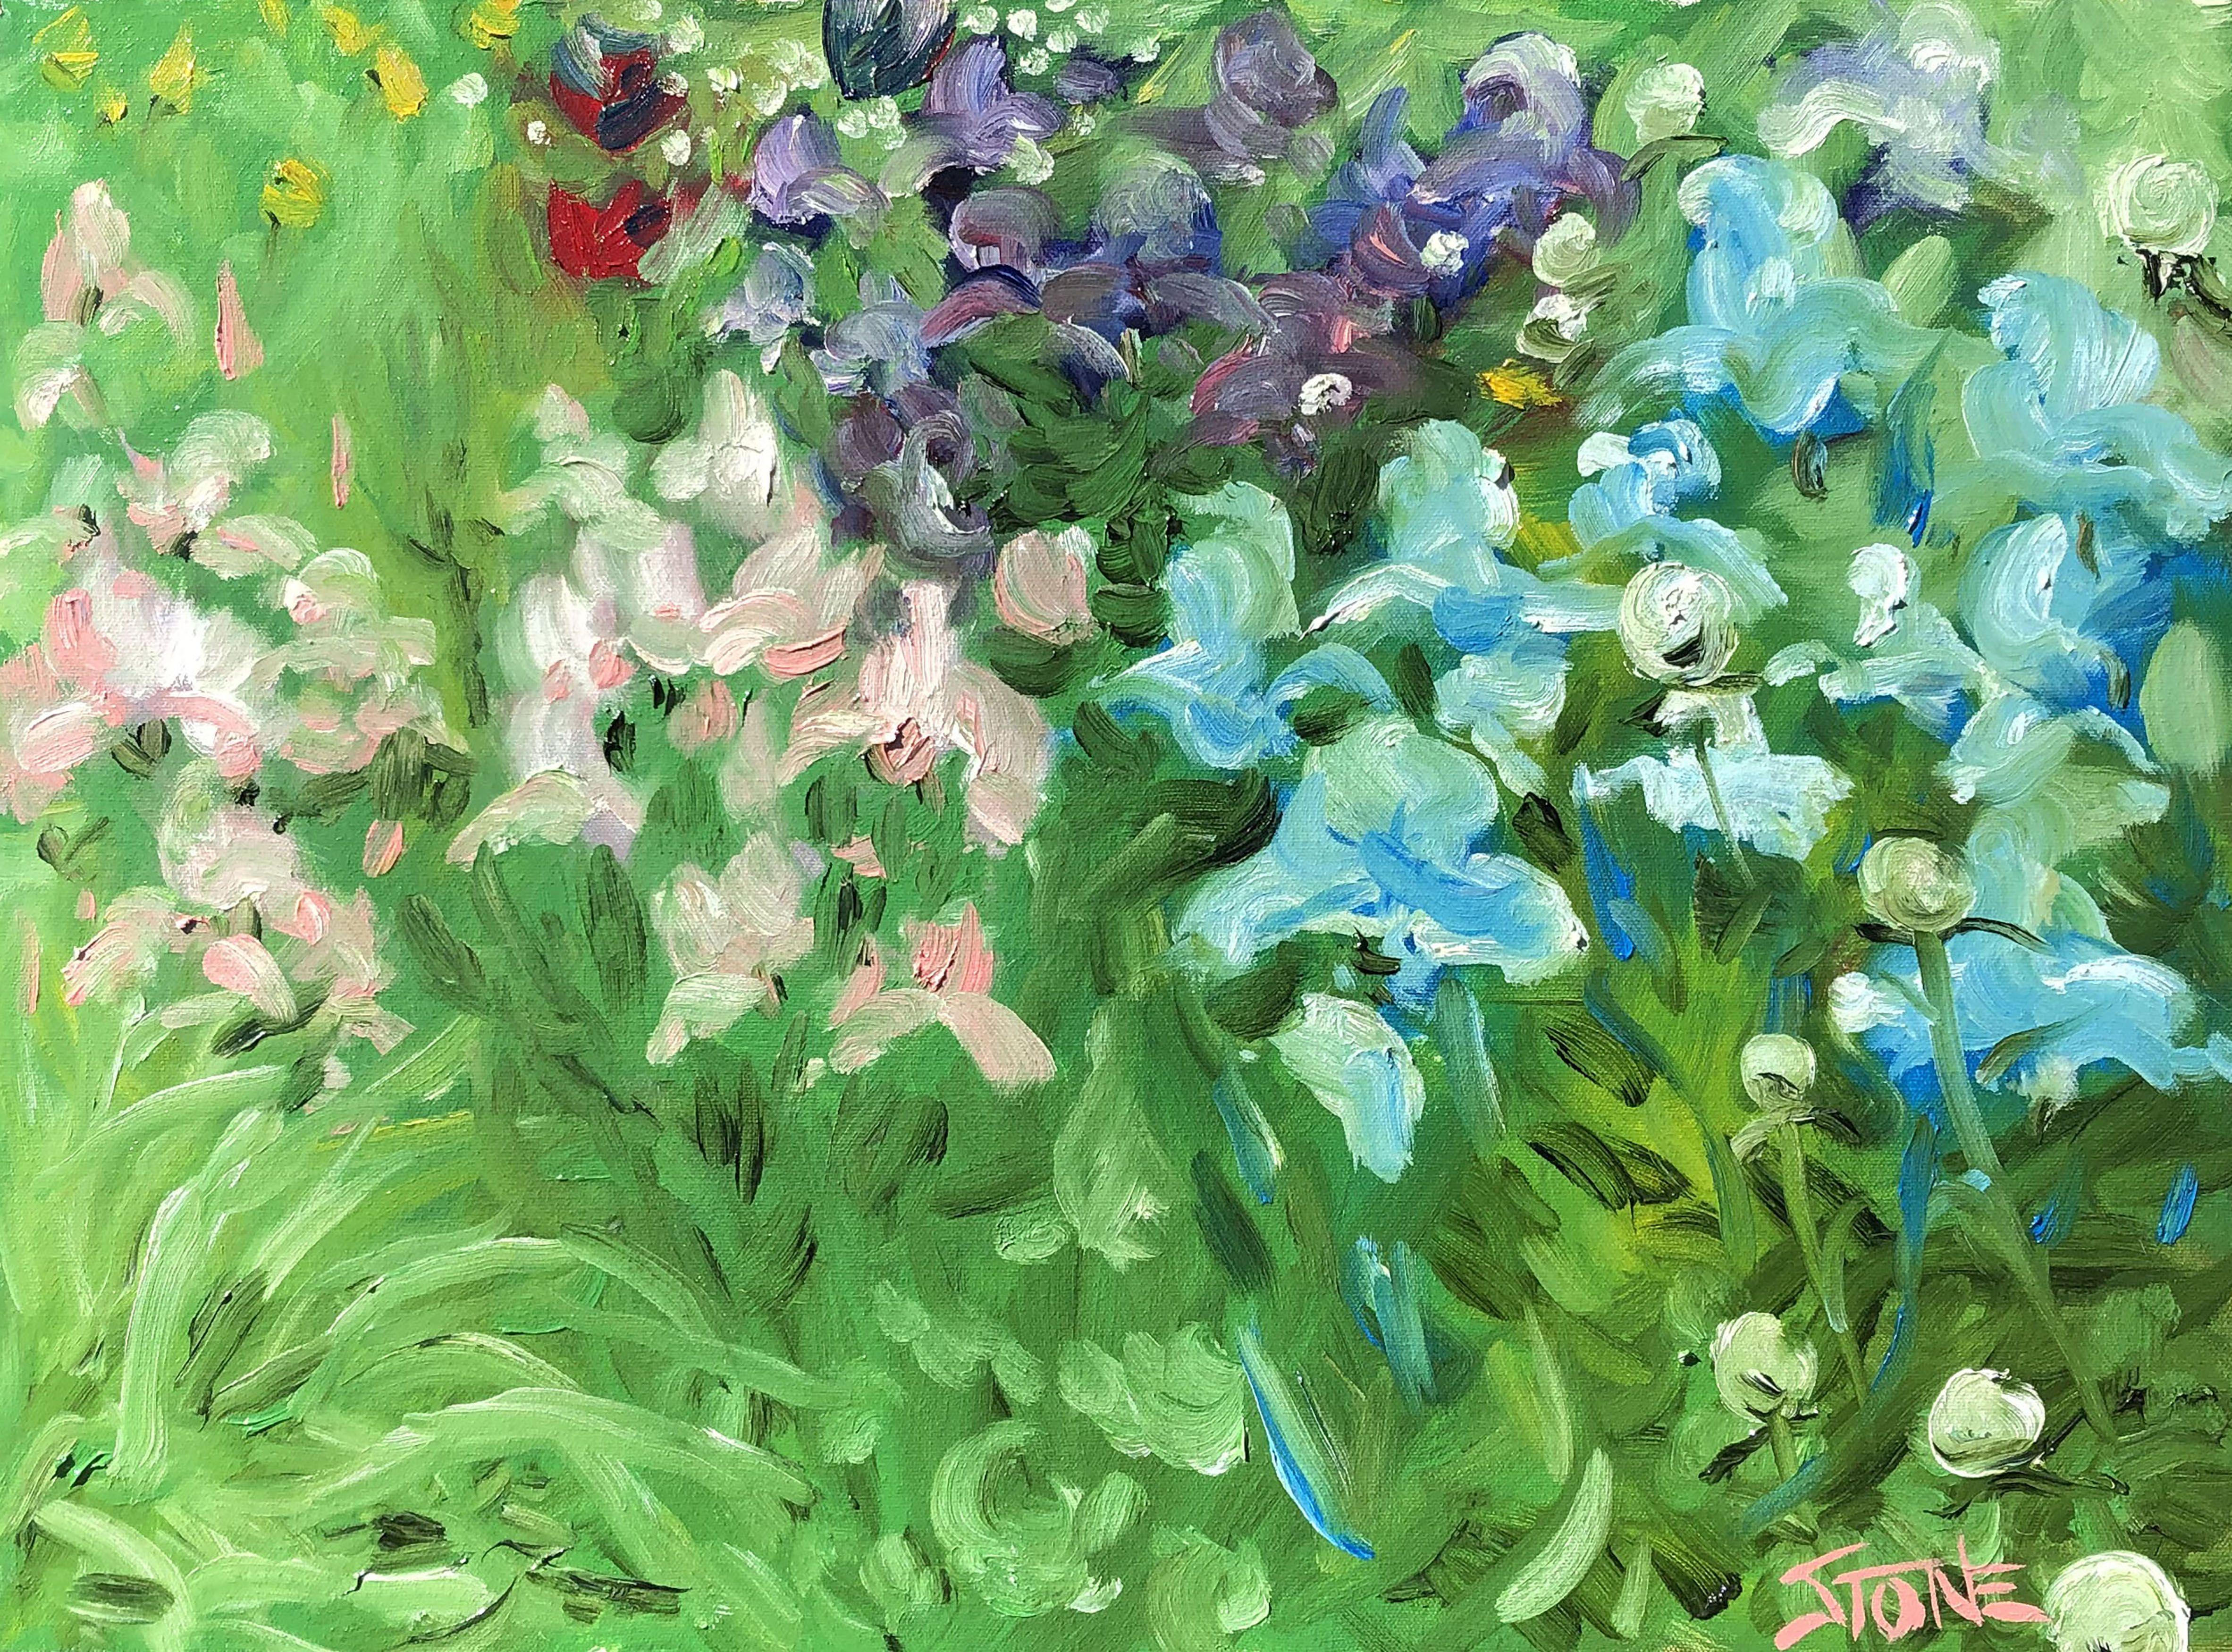 We bought our house from a wonderful woman who had a beautiful flower garden. This was my very first painting of many that I did standing in her garden. (Side-stapled canvas, should be framed.) :: Painting :: Impressionist :: This piece comes with